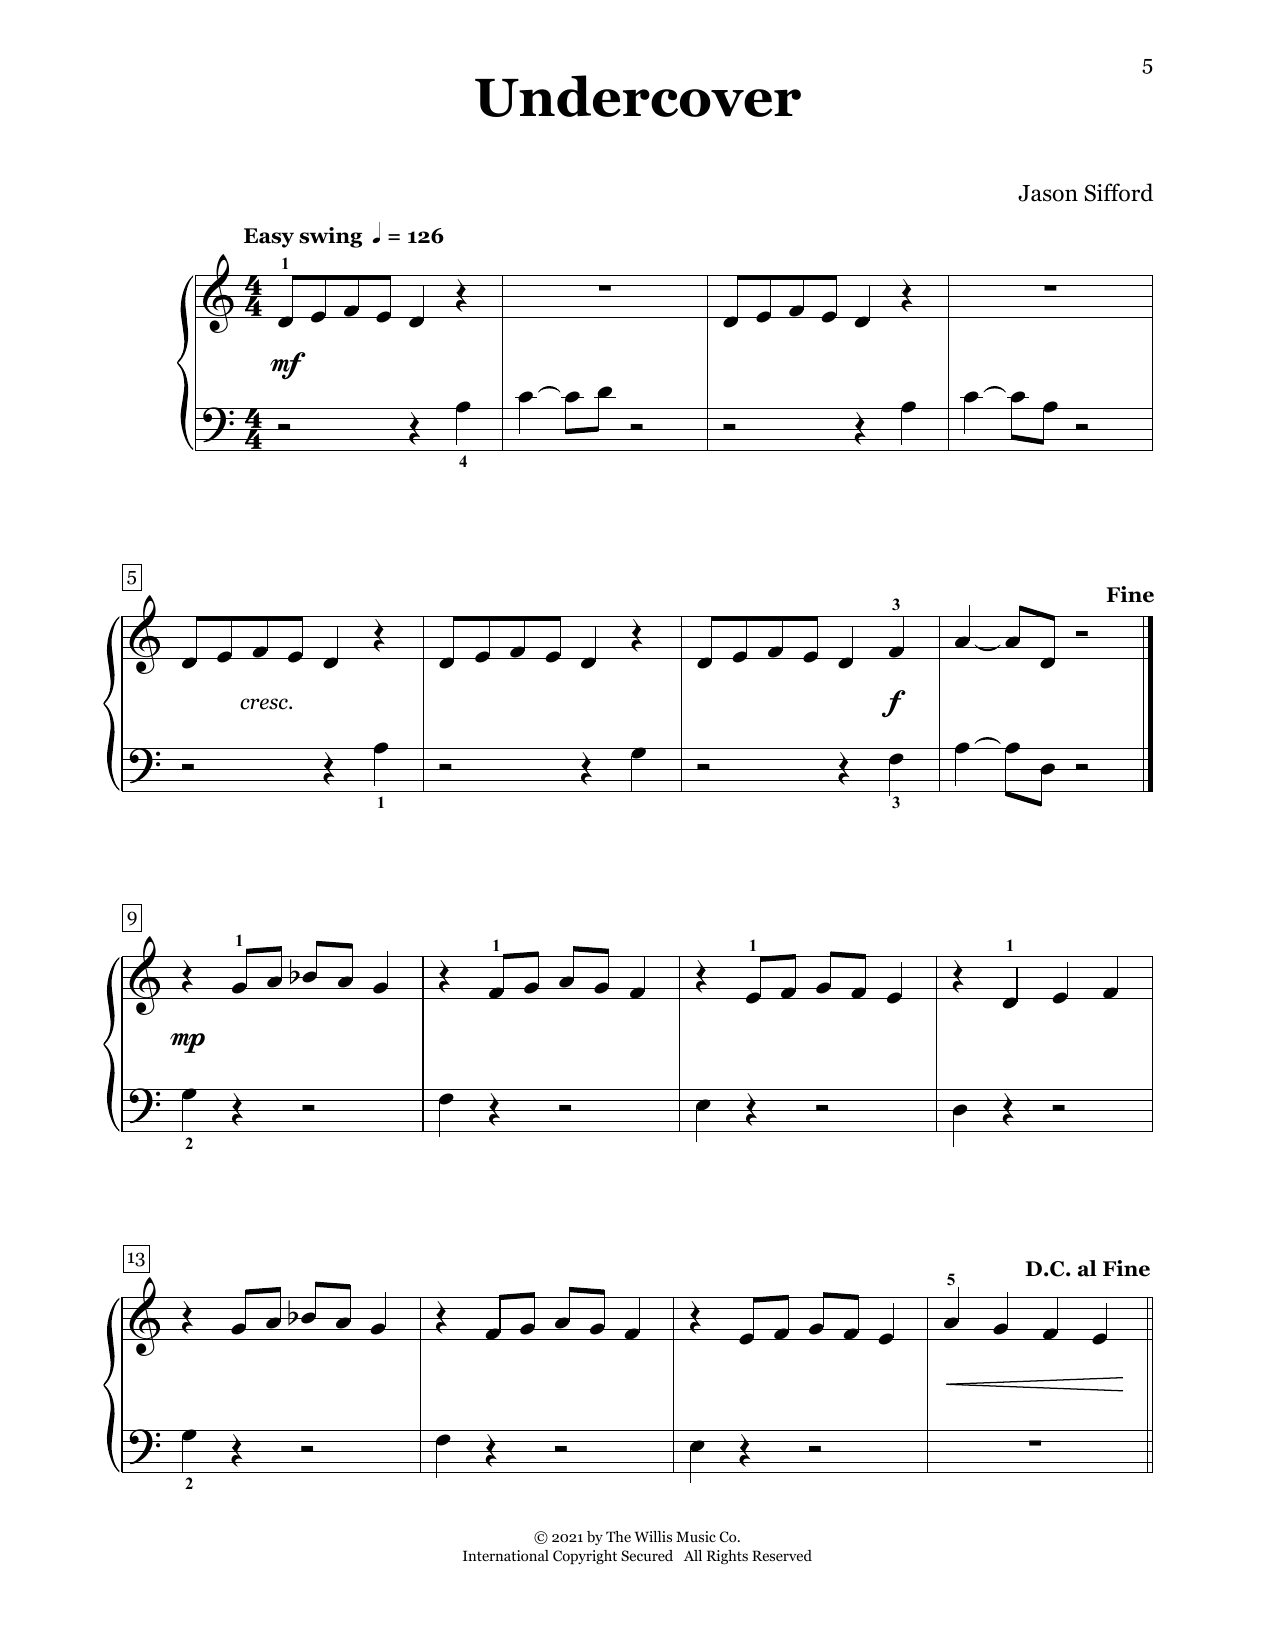 Download Jason Sifford Undercover Sheet Music